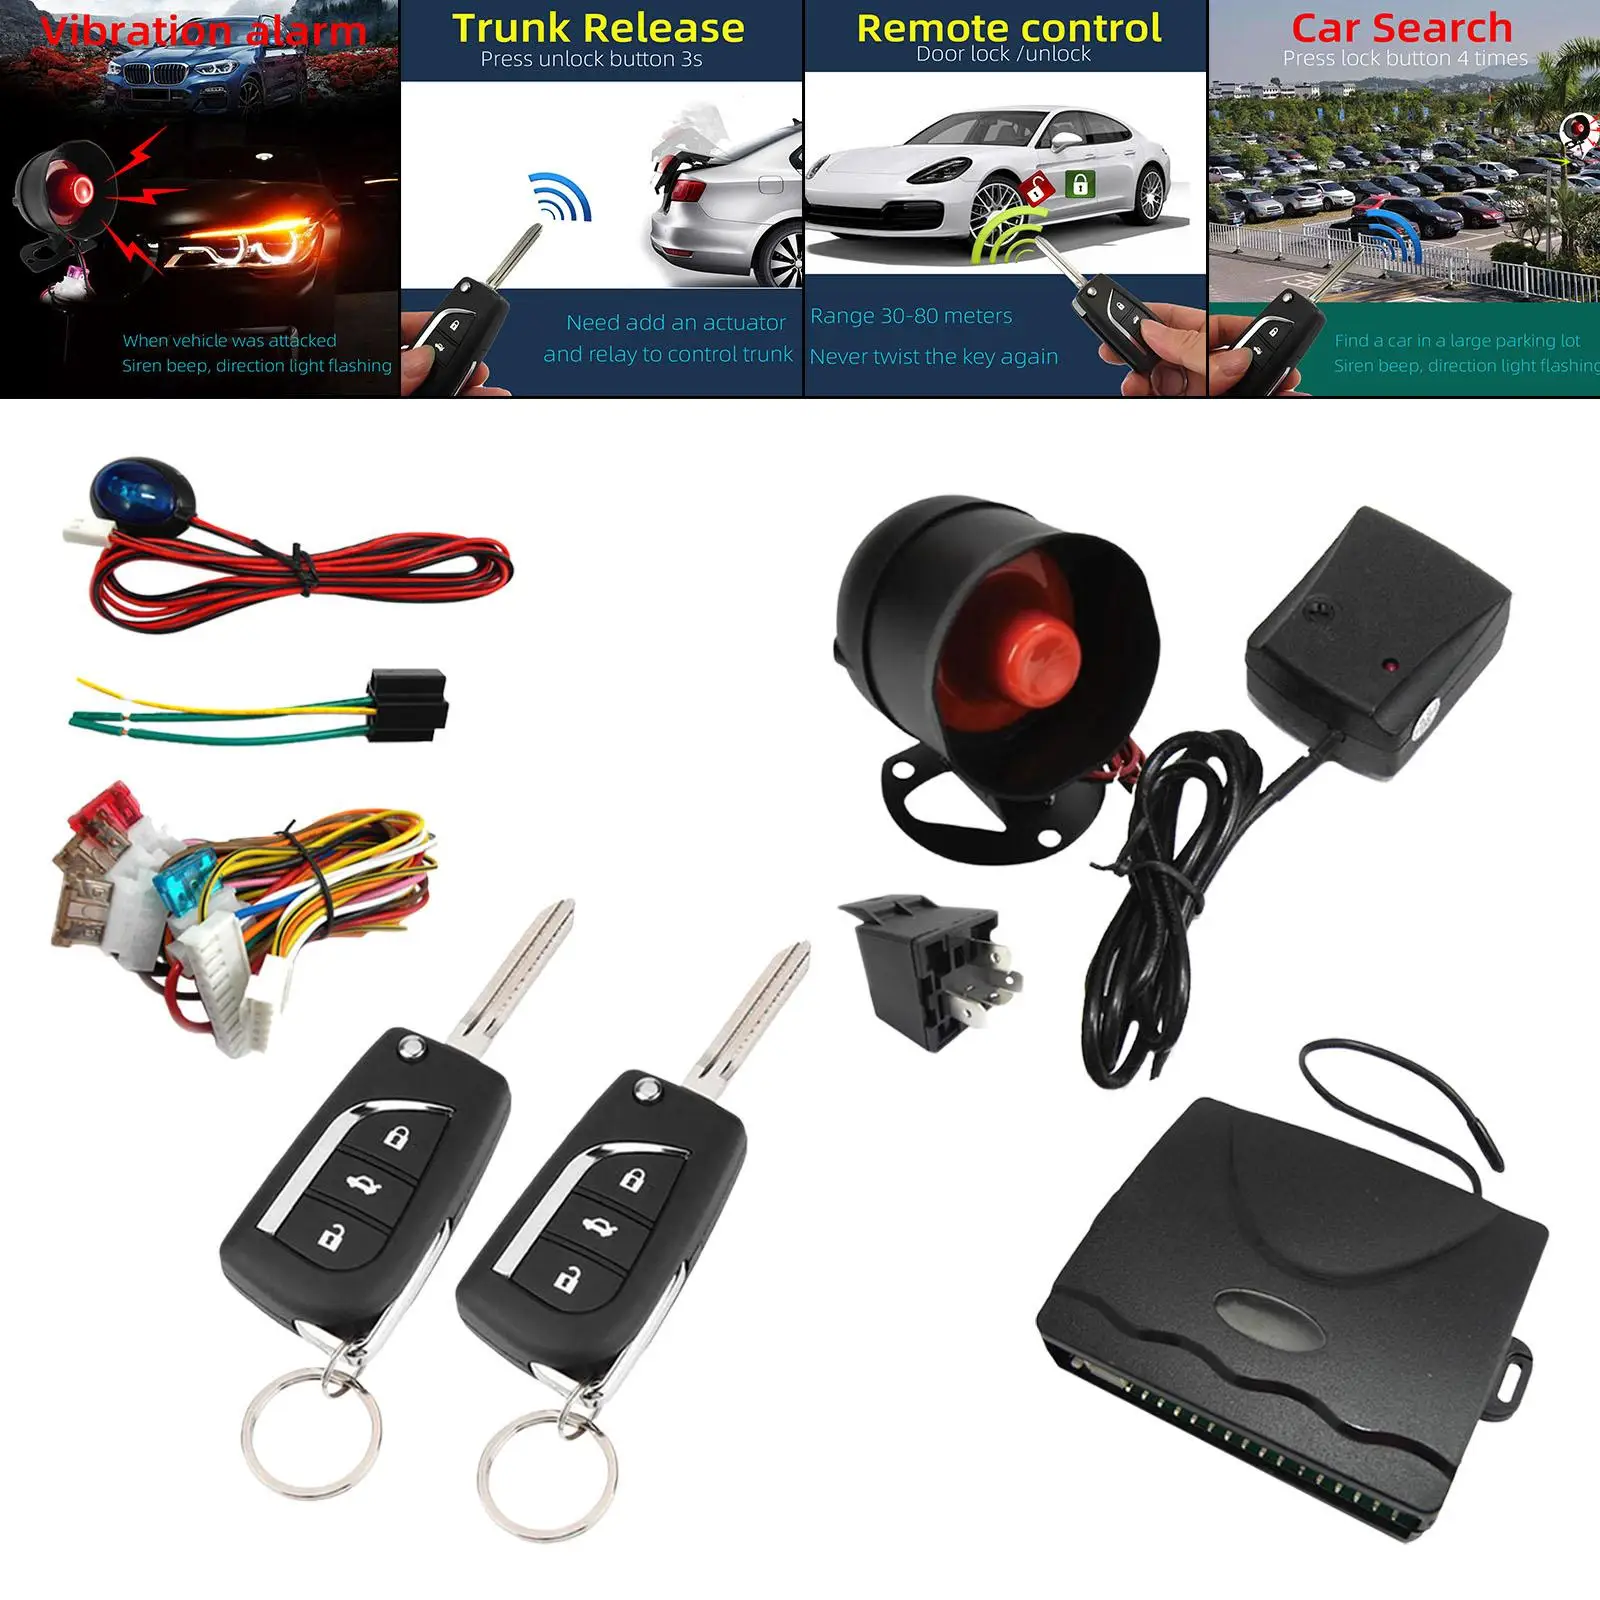 

1 Way Remote Start and Keyless Entry System Car Alarm Security System with Shock Sensor